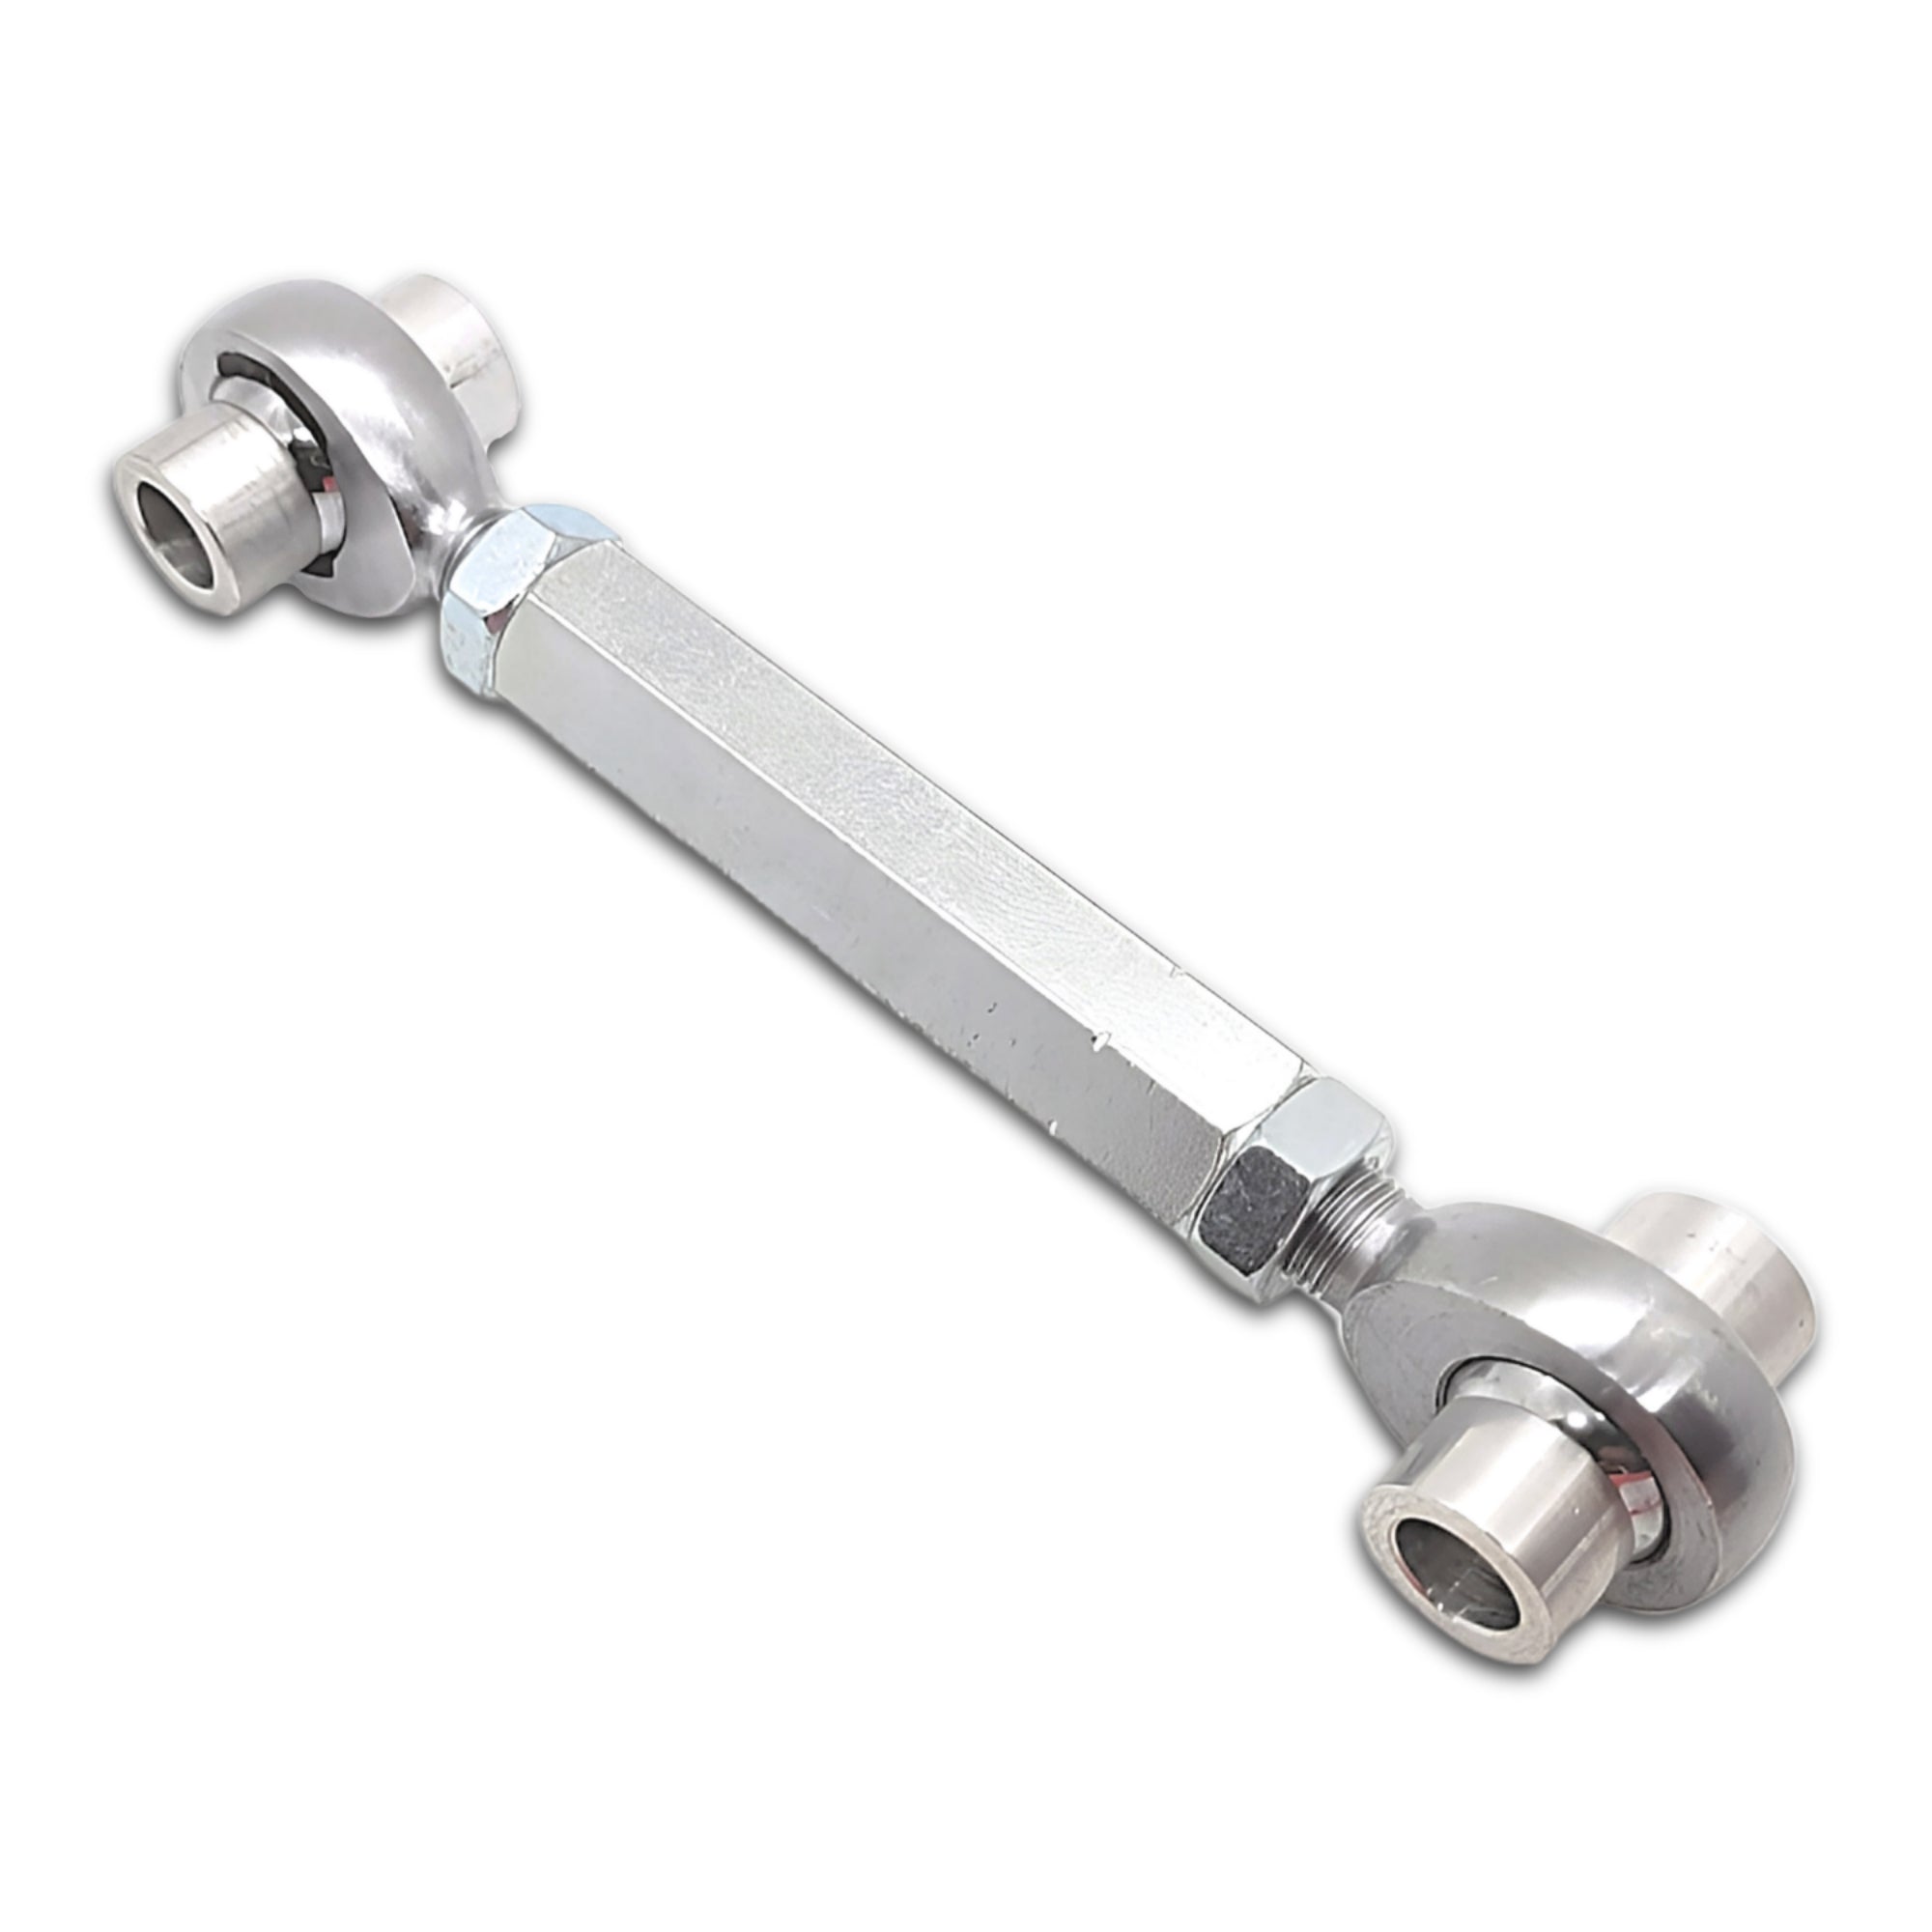 ZX-4R ZX-4RR All Years Adjustable Lowering Links Kit 1.5 Inches Lower